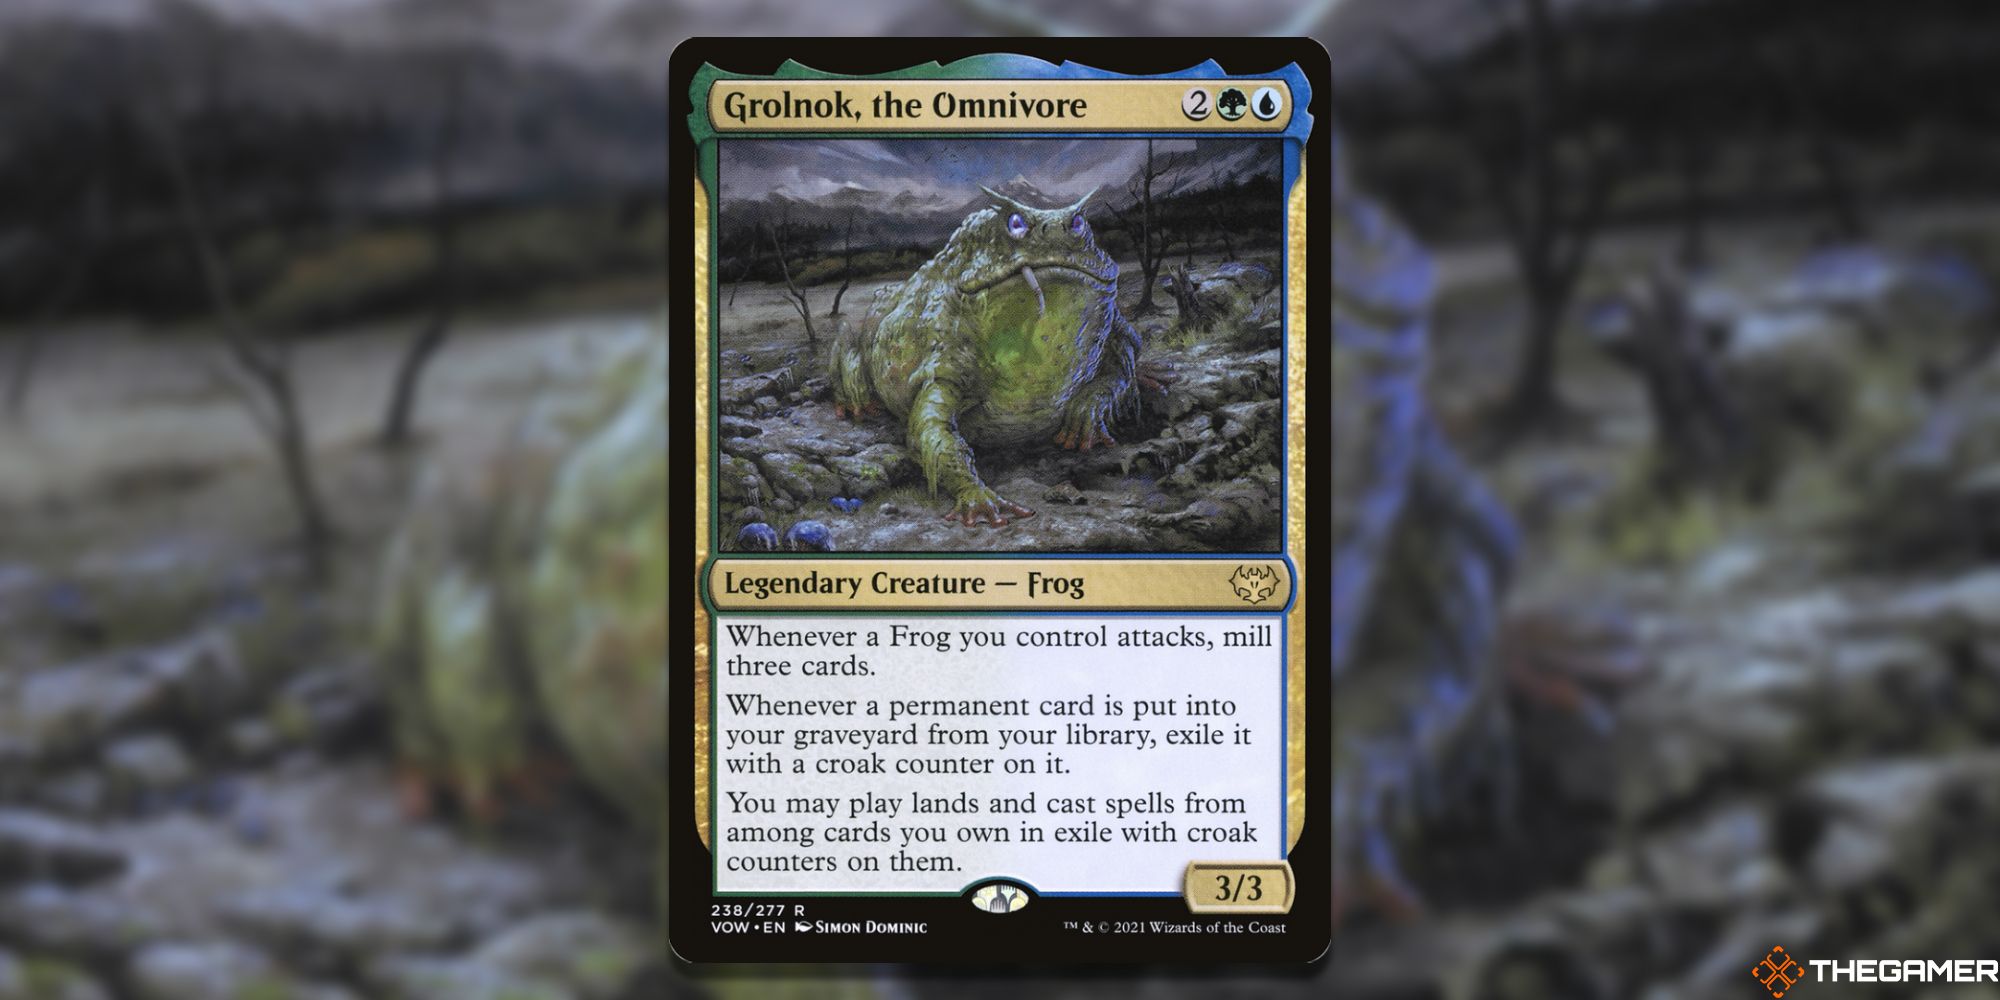 Image of the Grolnok, the Omnivore card in Magic: The Gathering, with art by Simon Dominic